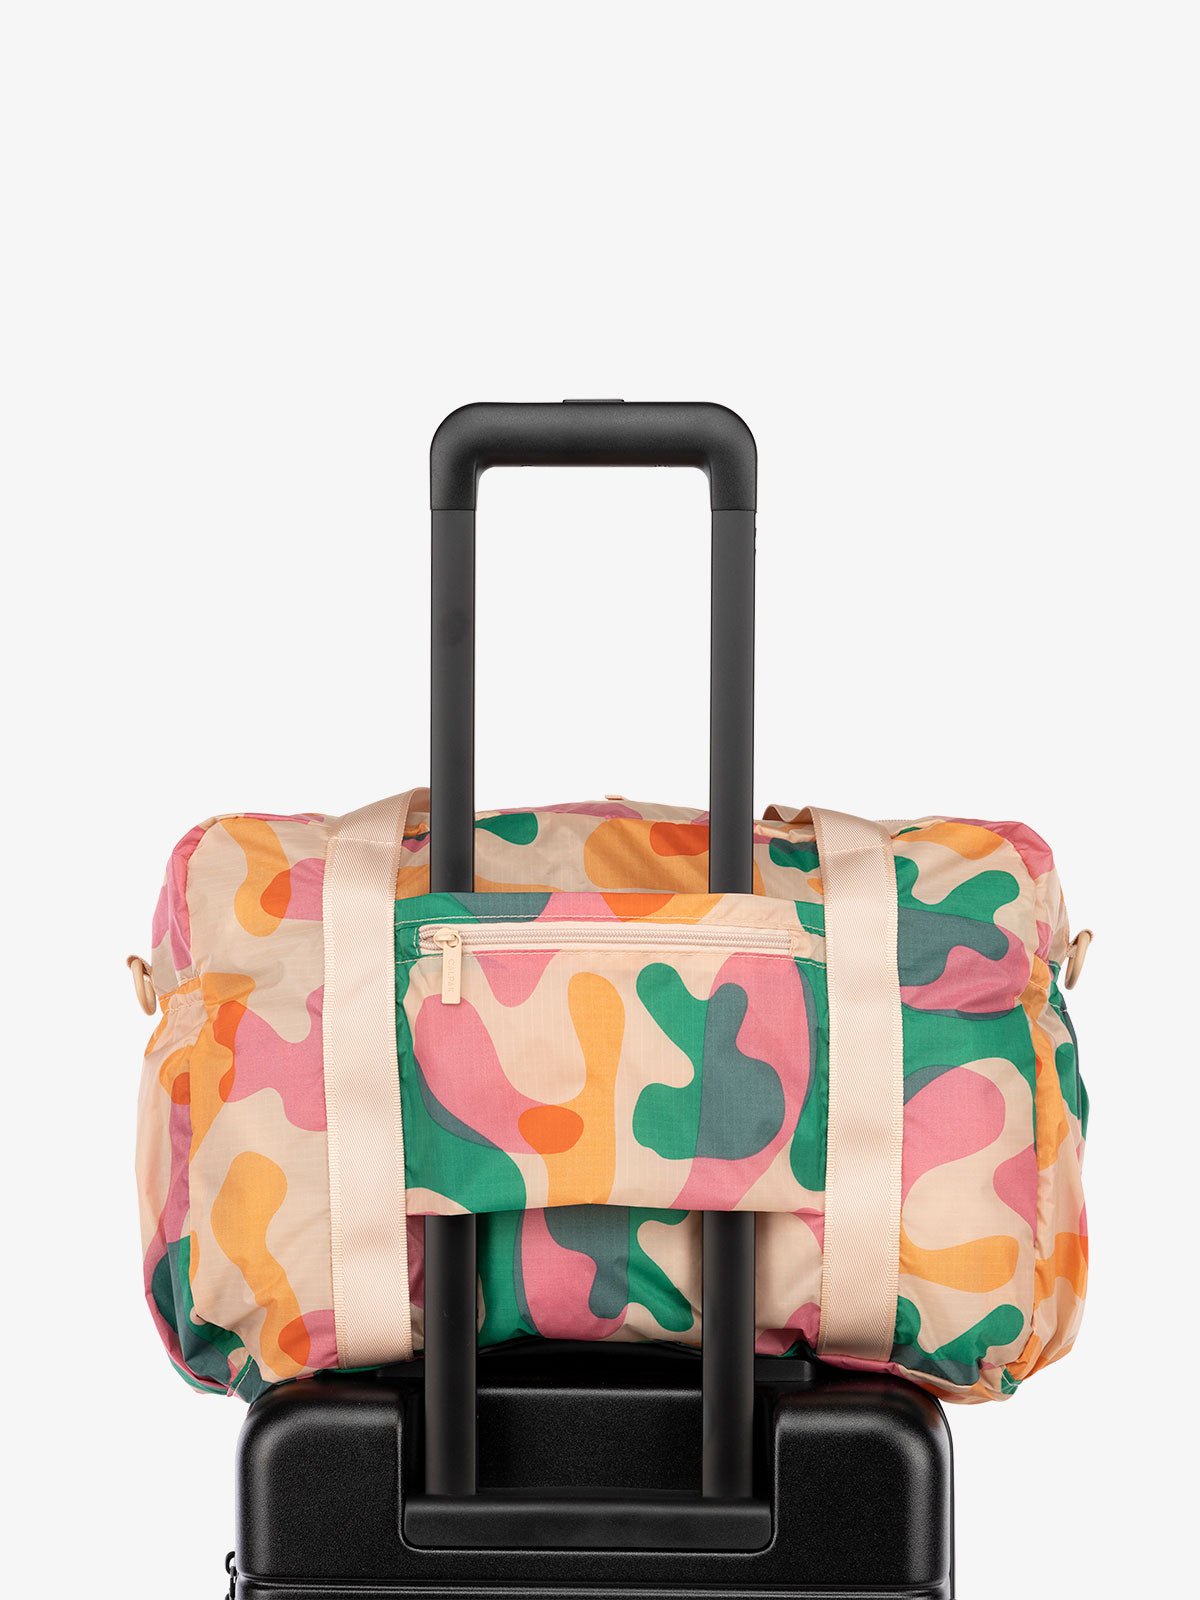 CALPAK Compakt nylon duffle bag with trolley sleeve in pink and green abstract print